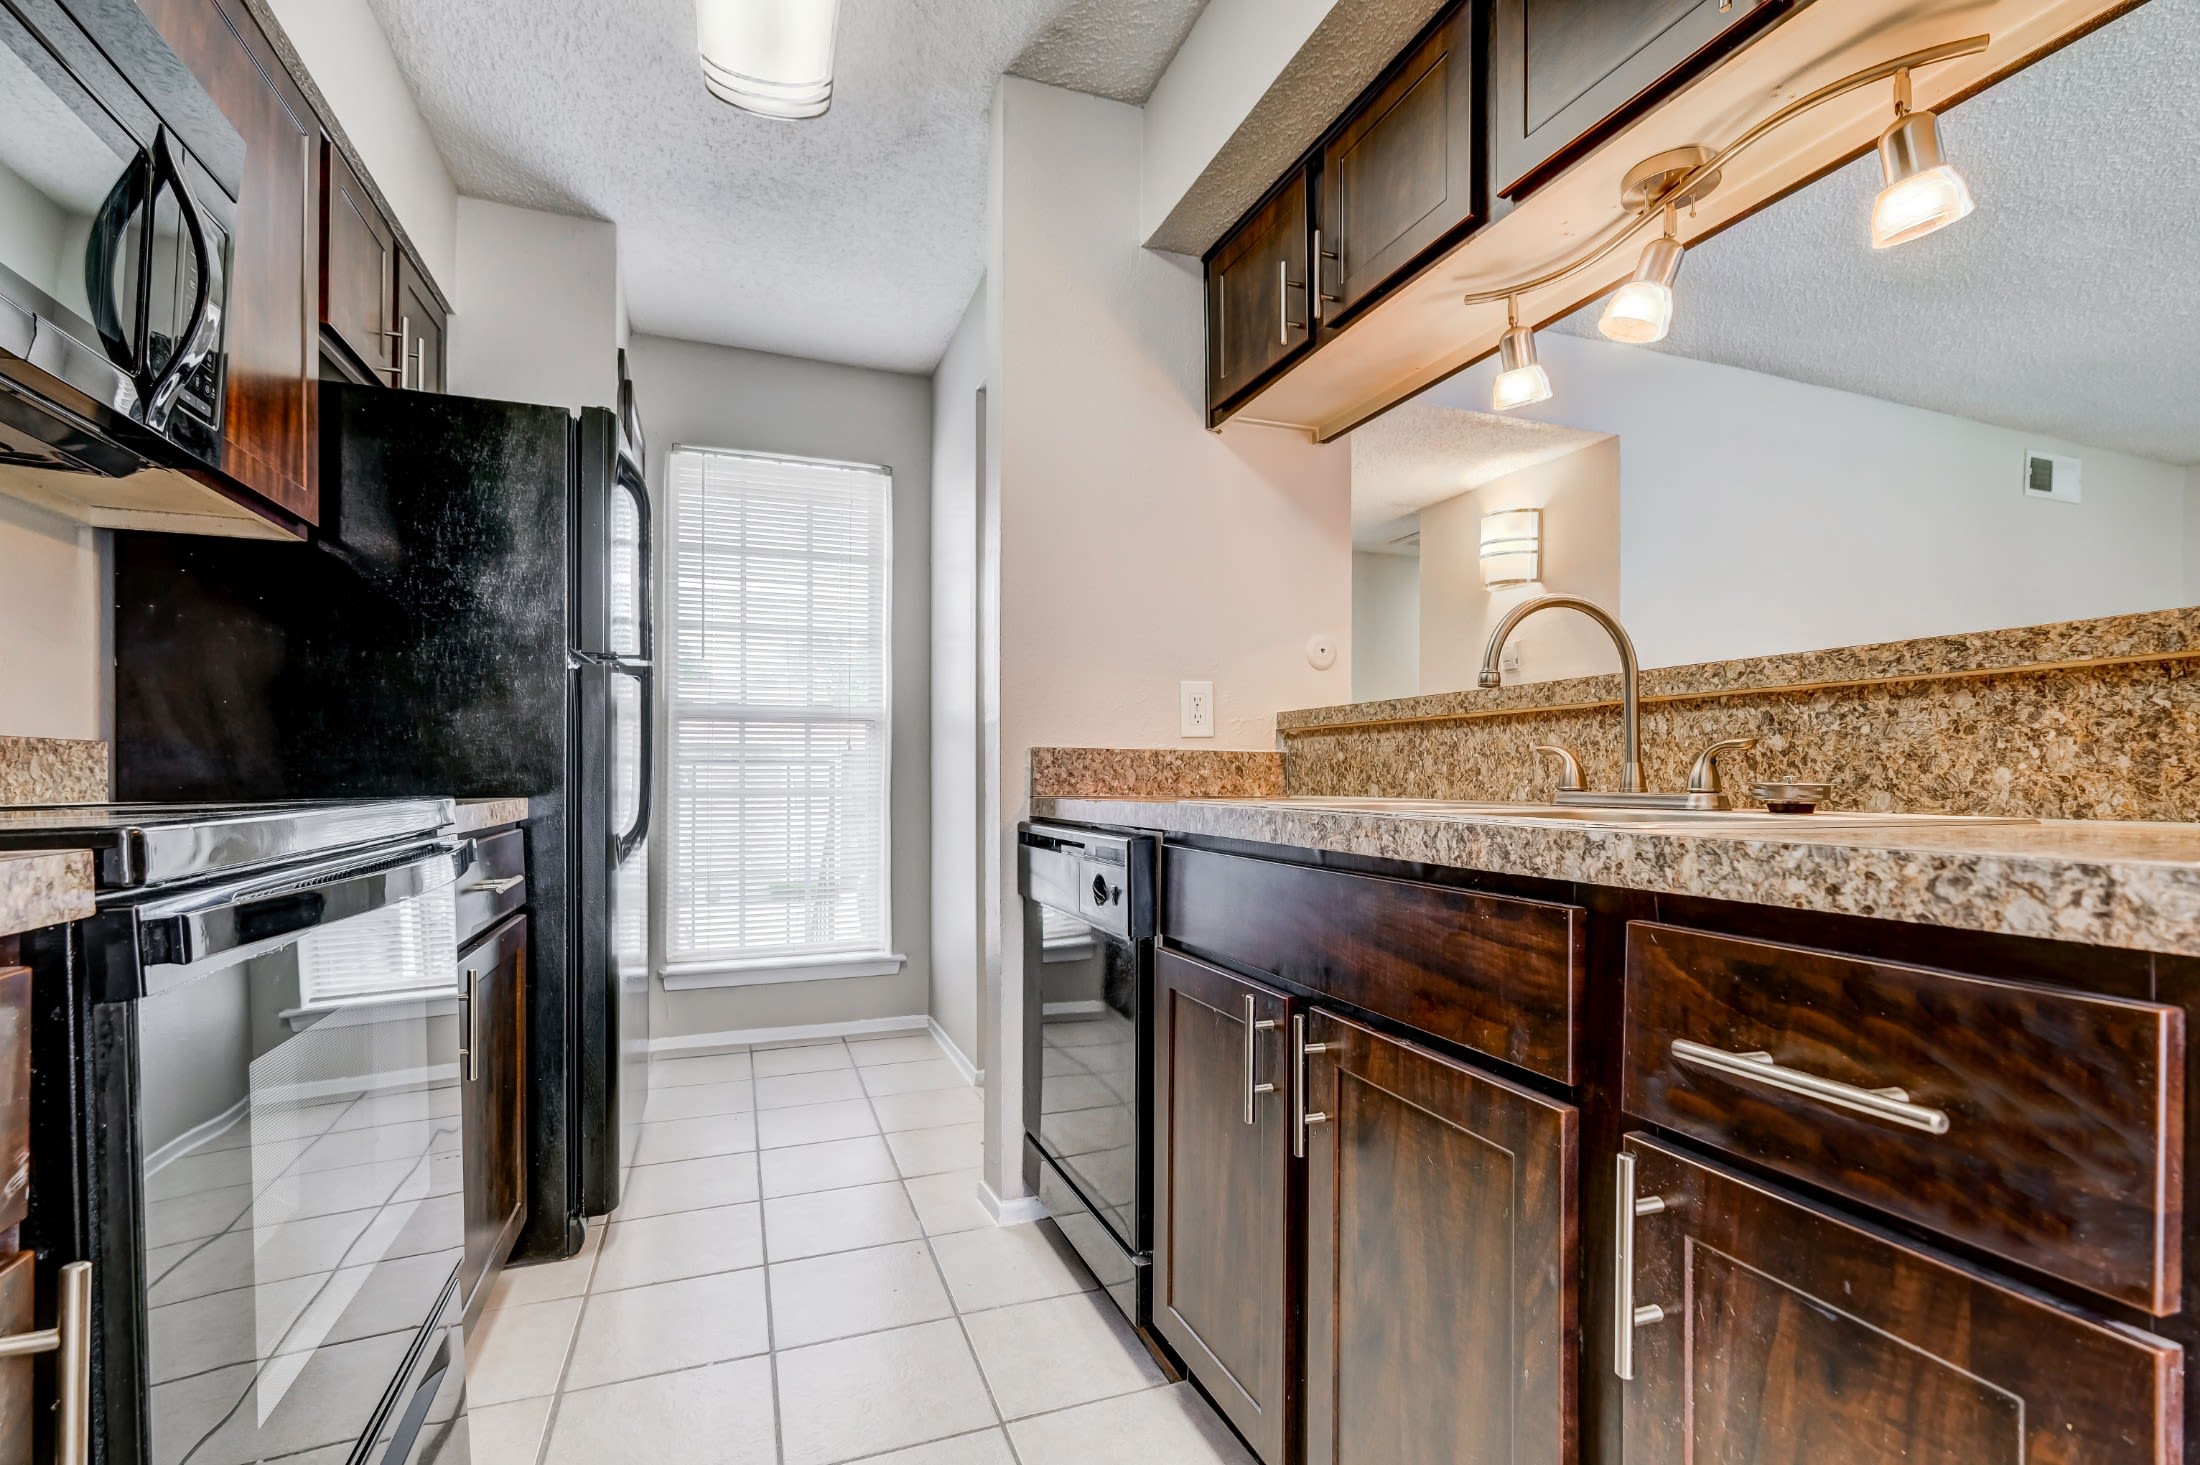 Fully equipped modern kitchen at Grand Seasons Apartment Homes in Dallas, Texas